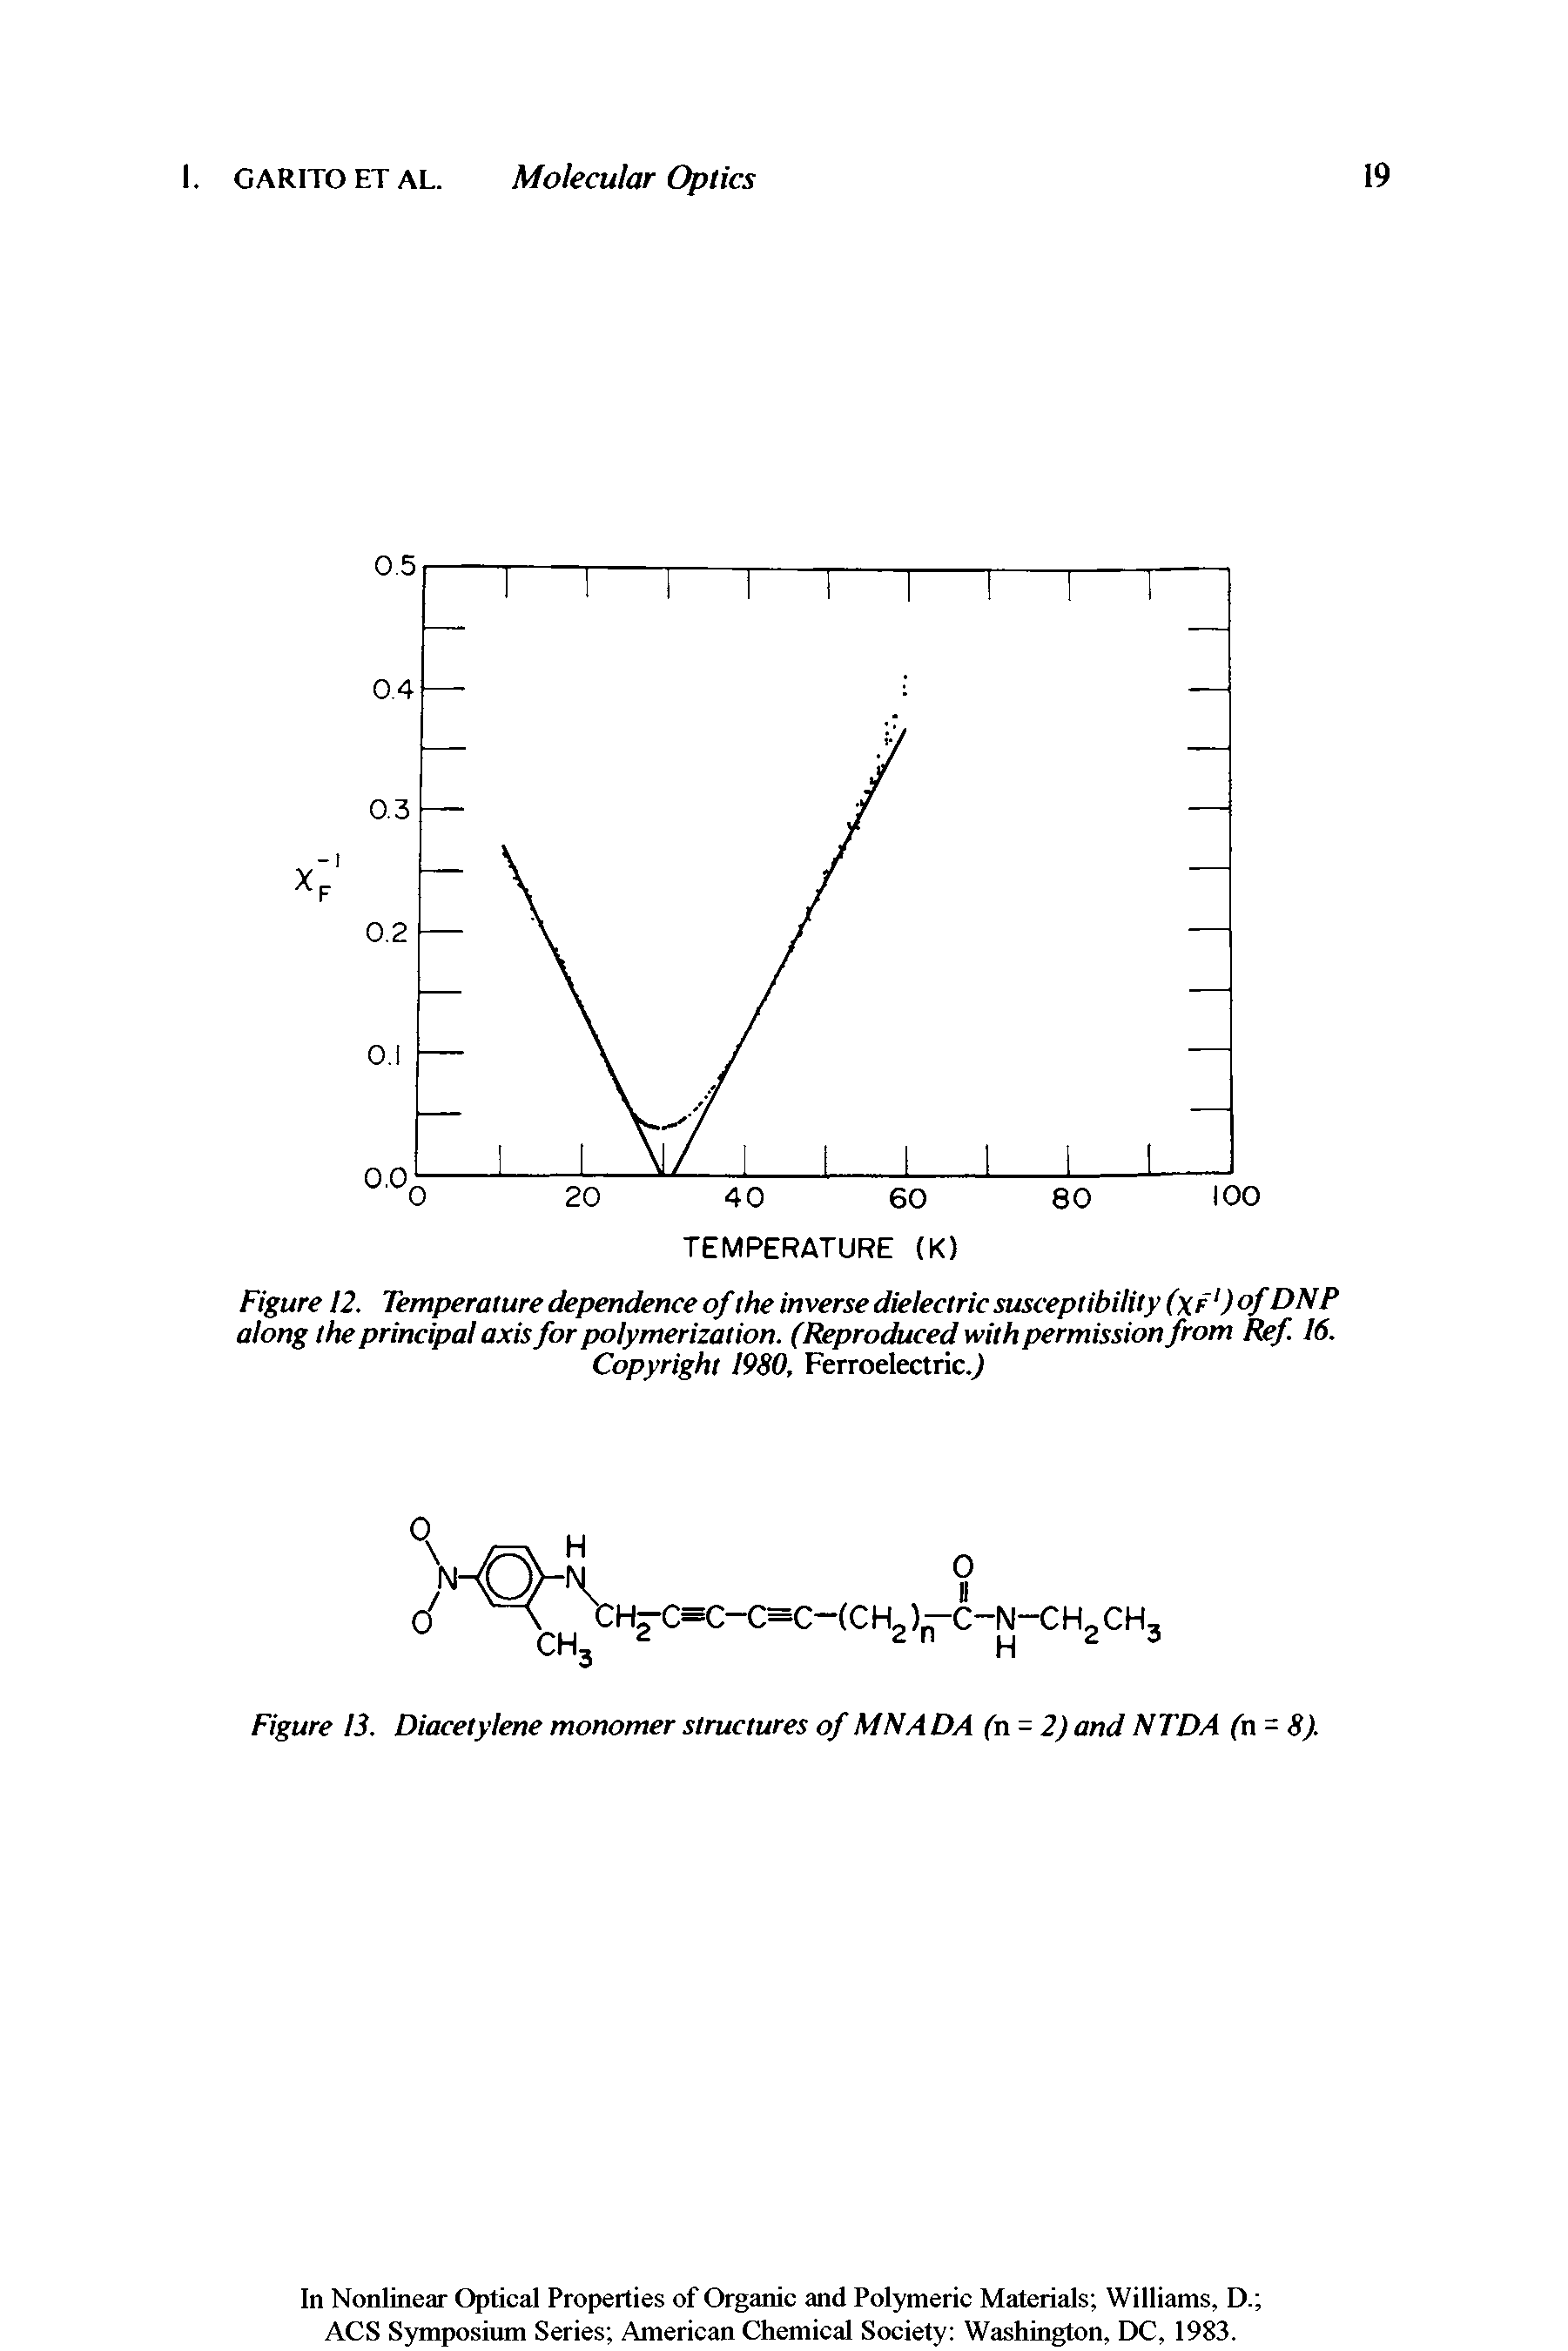 Figure 12. Temperature dependence of the inverse dielectric susceptibility (xr ) of DNP along the principal axis for polymerization. (Reproduced with permission from Ref. 16. Copyright 1980, Ferroelectric. ...